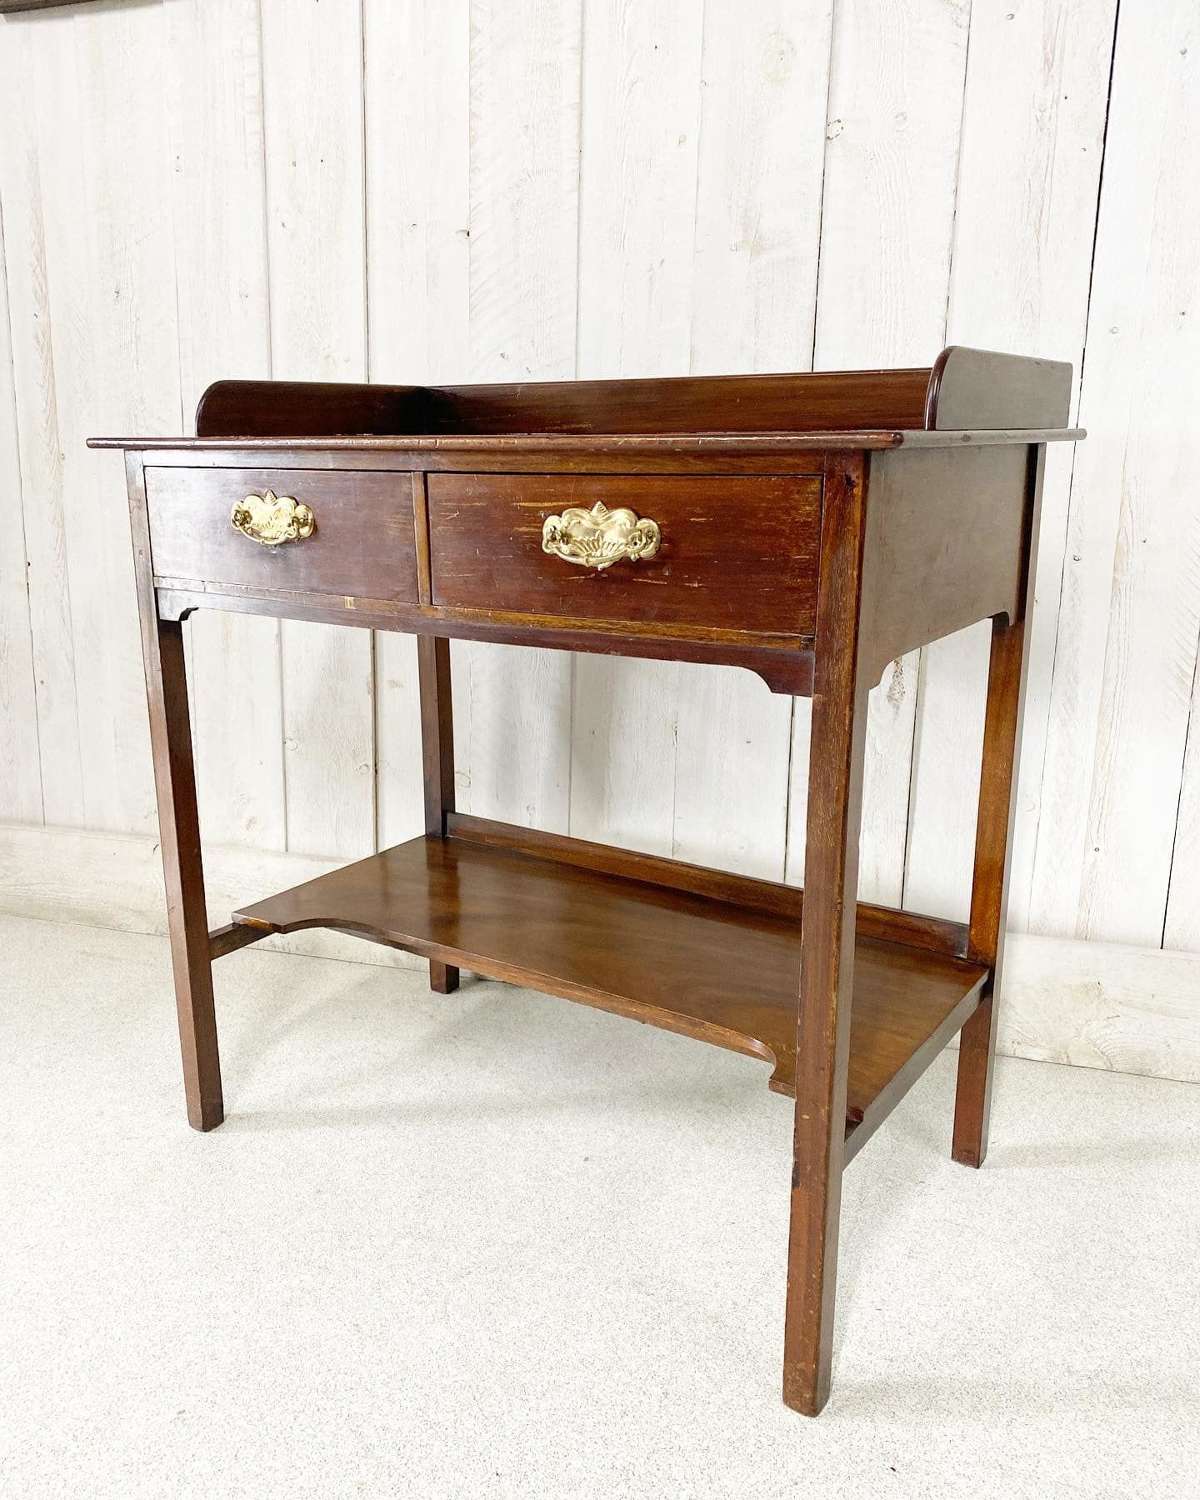 Victorian Mahogany Side Table or Desk